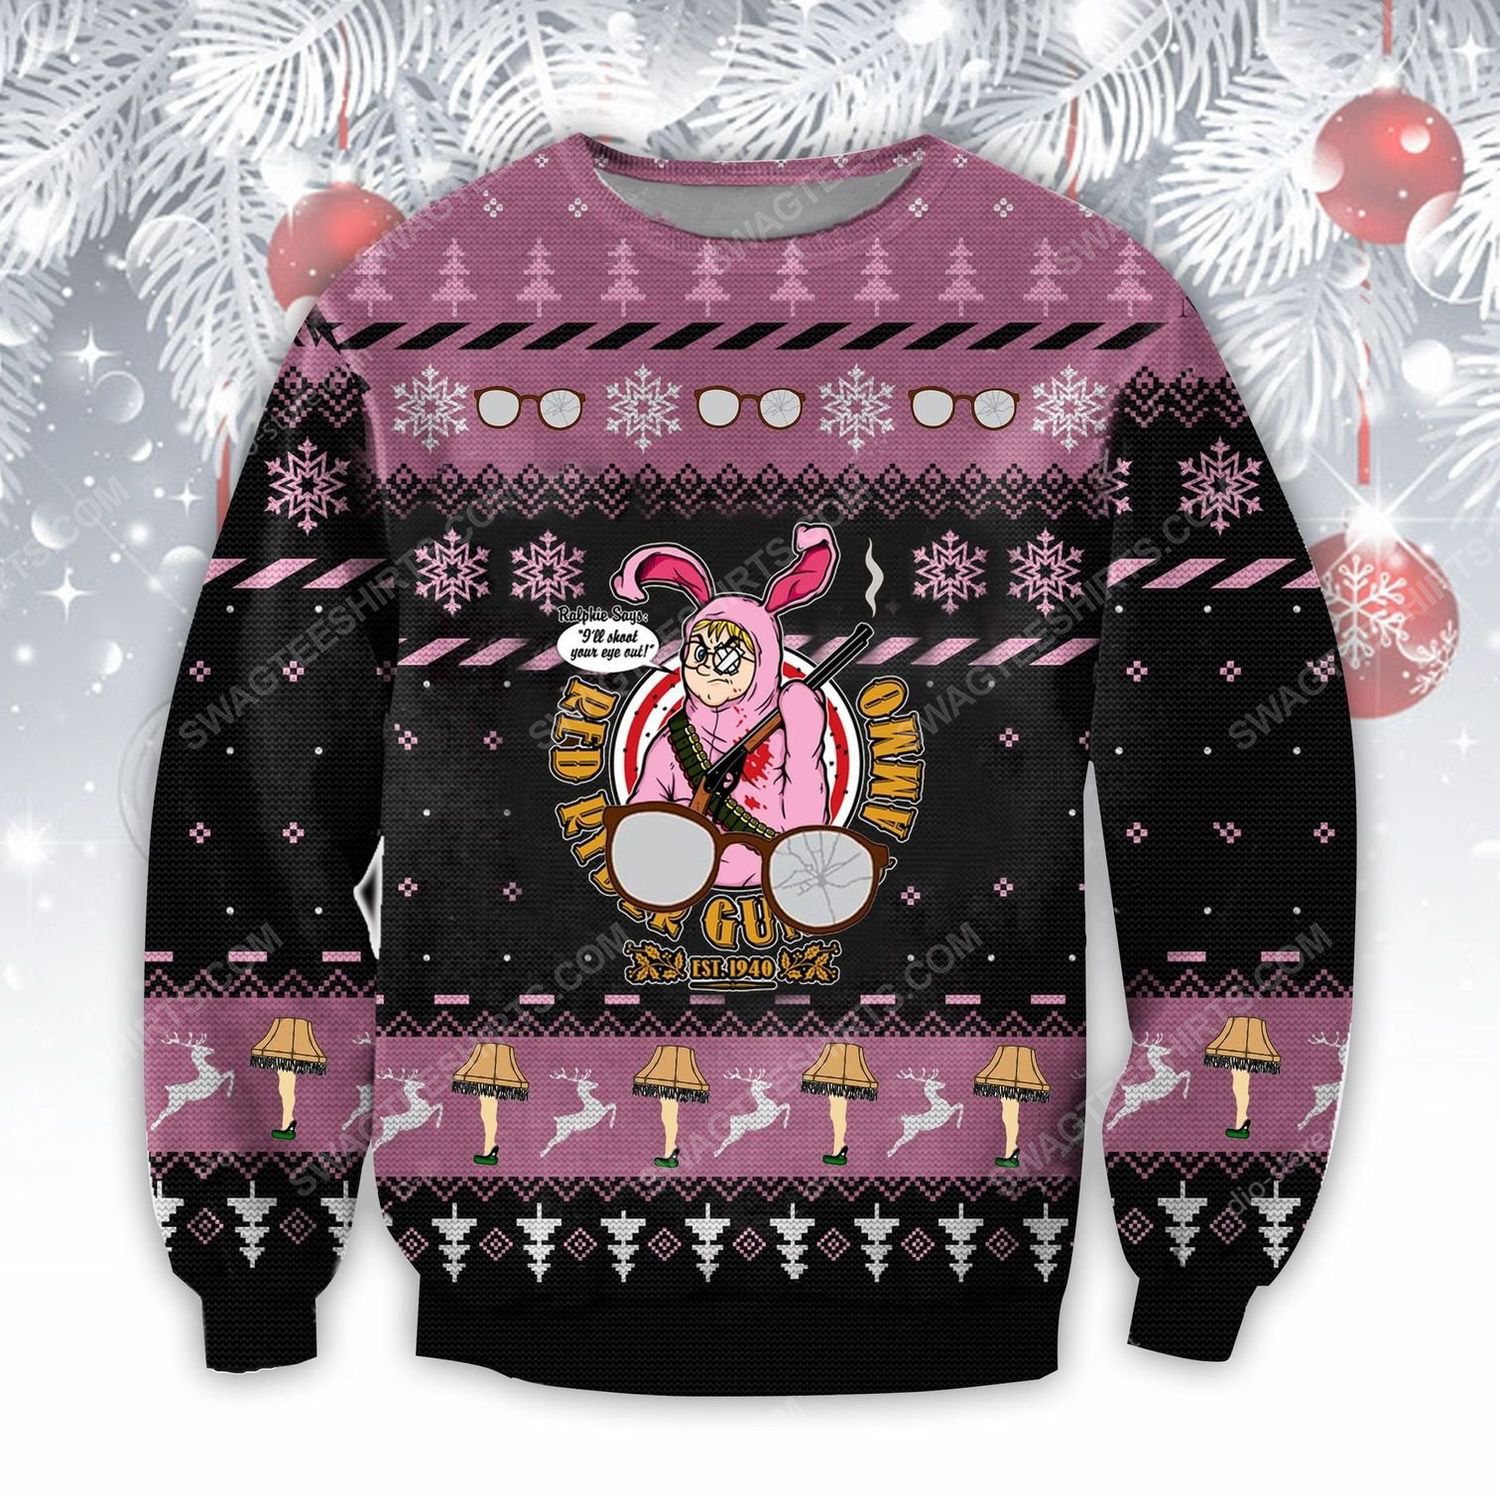 [special edition] Red ryder guns and ammo ugly christmas sweater – maria